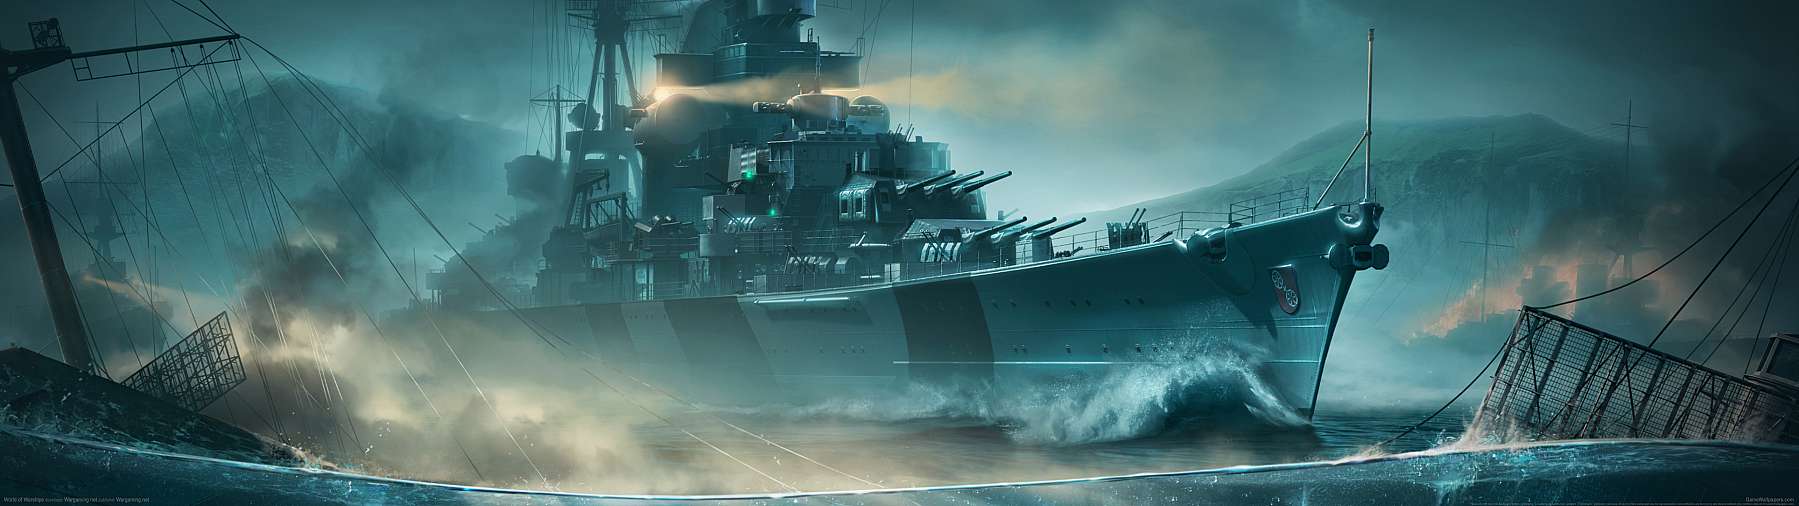 World of Warships superwide fond d'cran 28